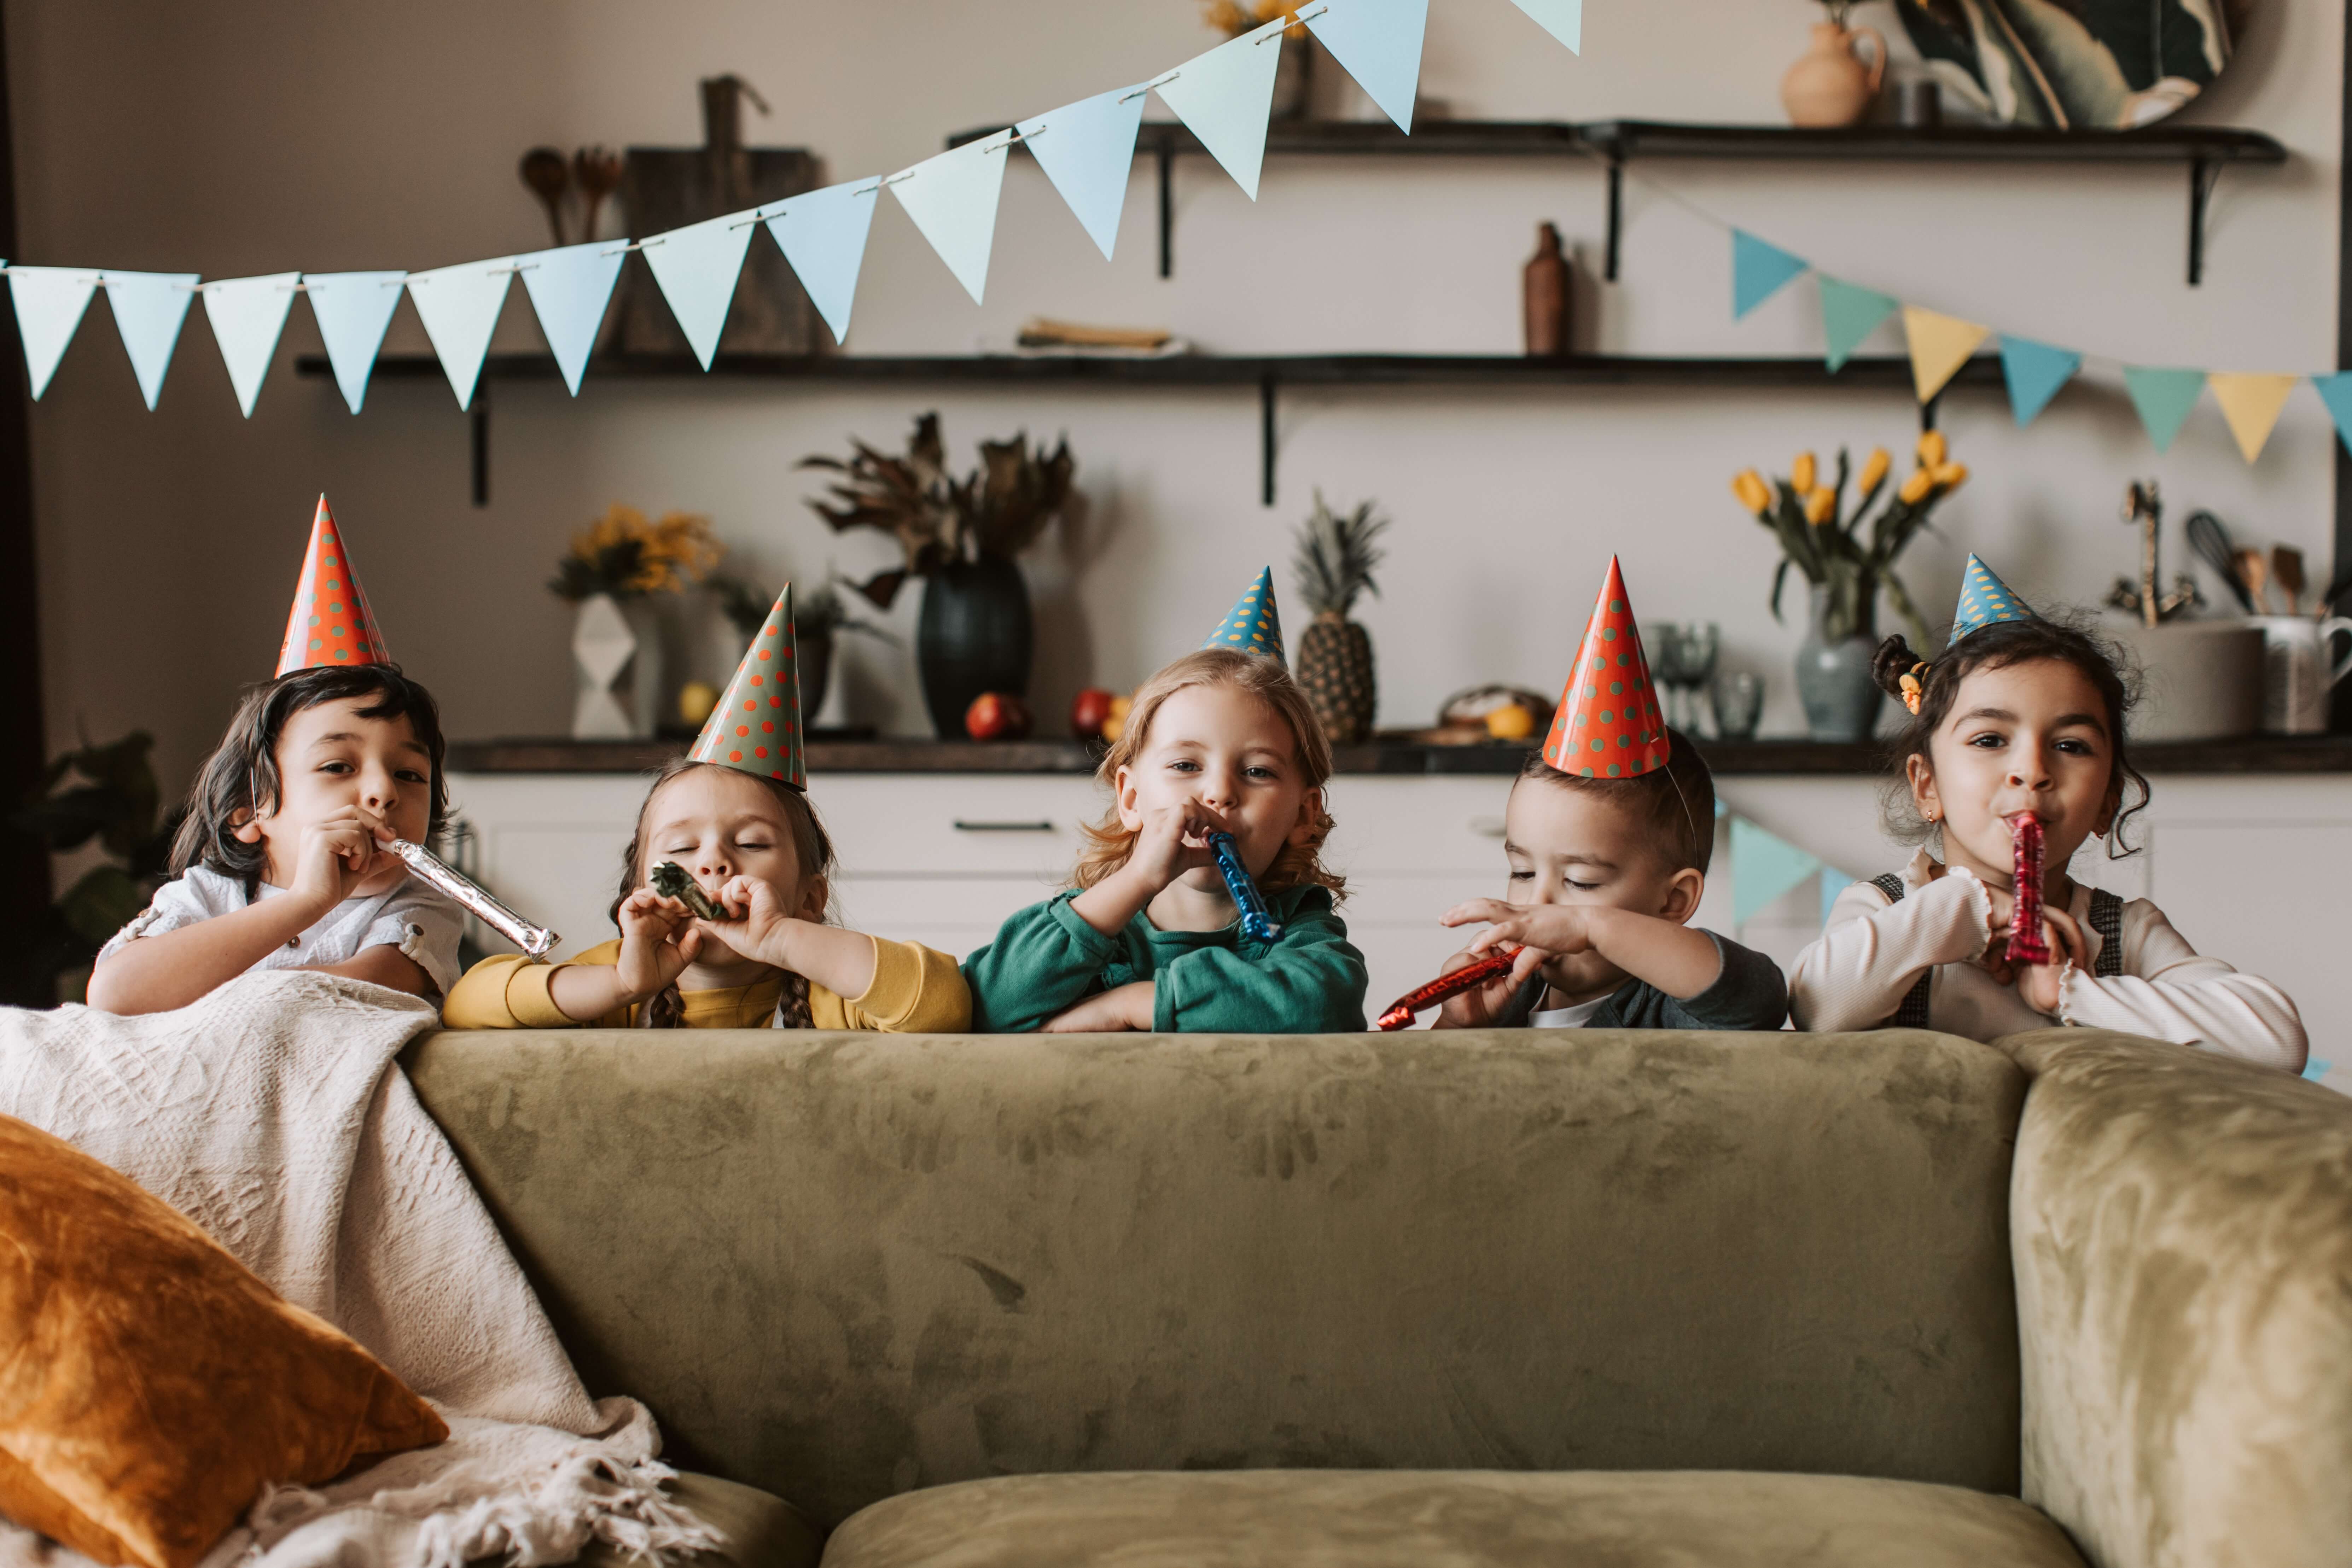 Ramp up the fun with these 7 birthday party games